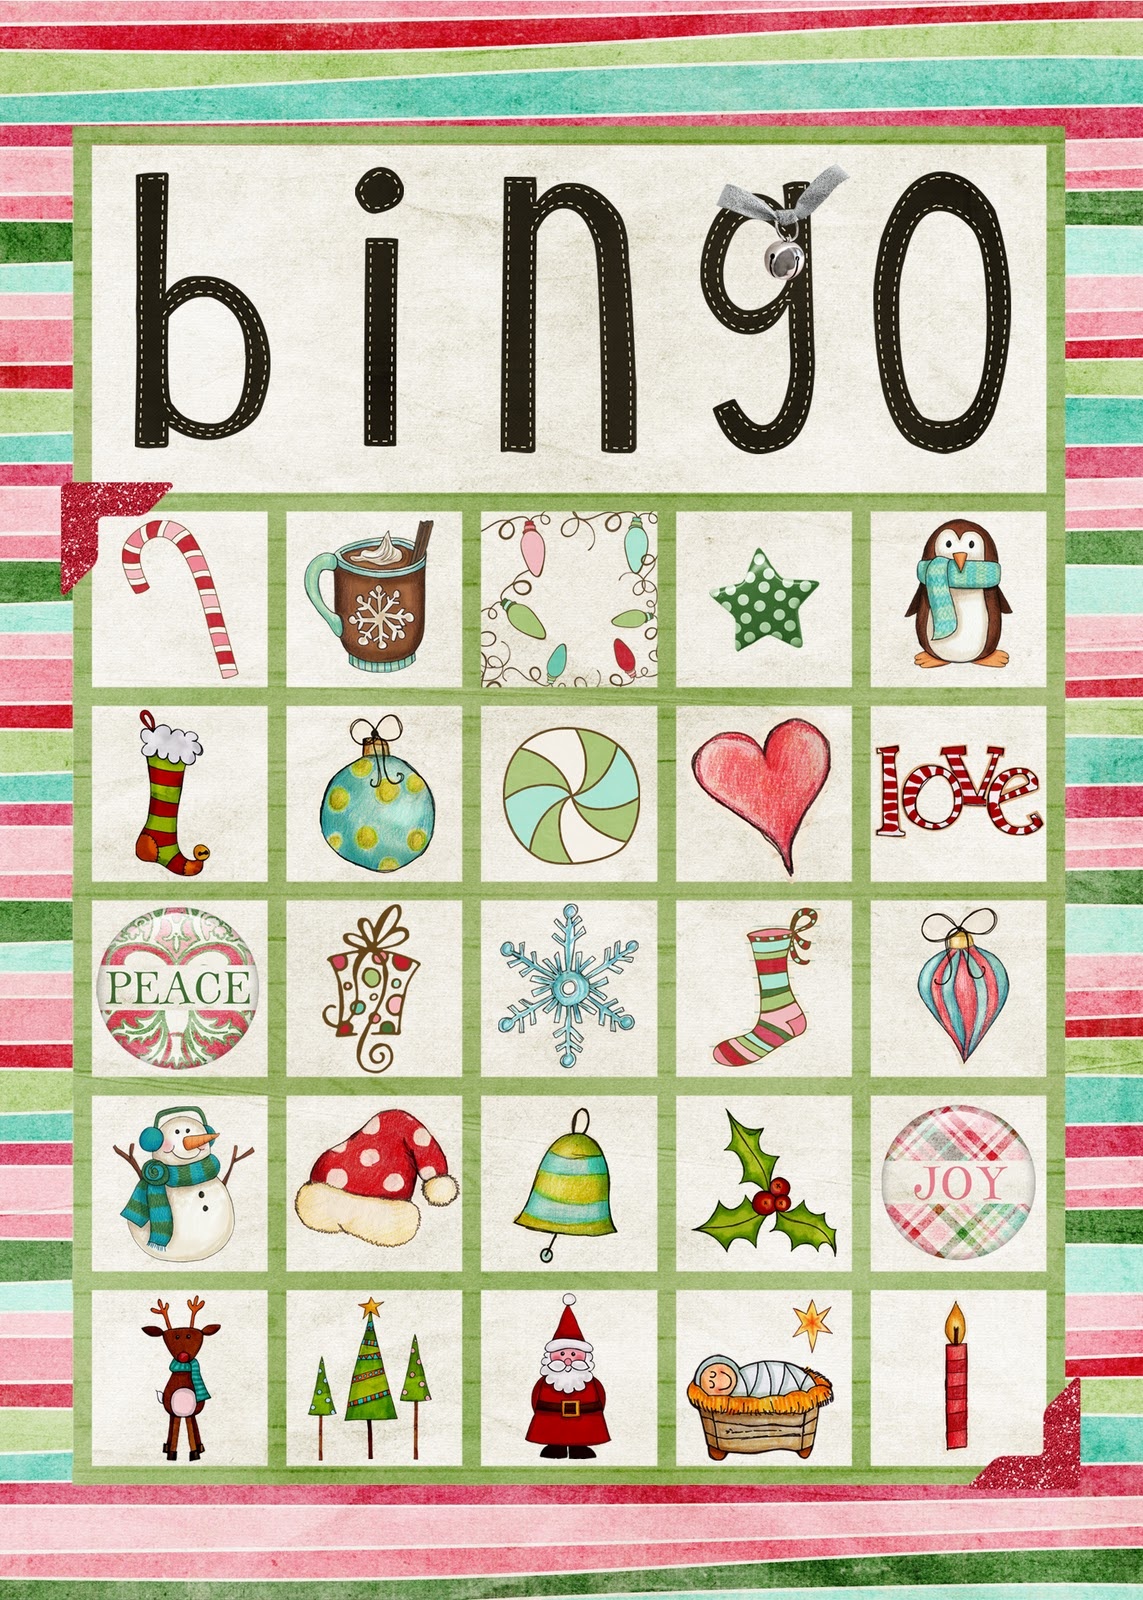 Free Printable Christmas Bingo Cards For Large Groups - Printable Cards - Free Printable Bingo Cards For Large Groups